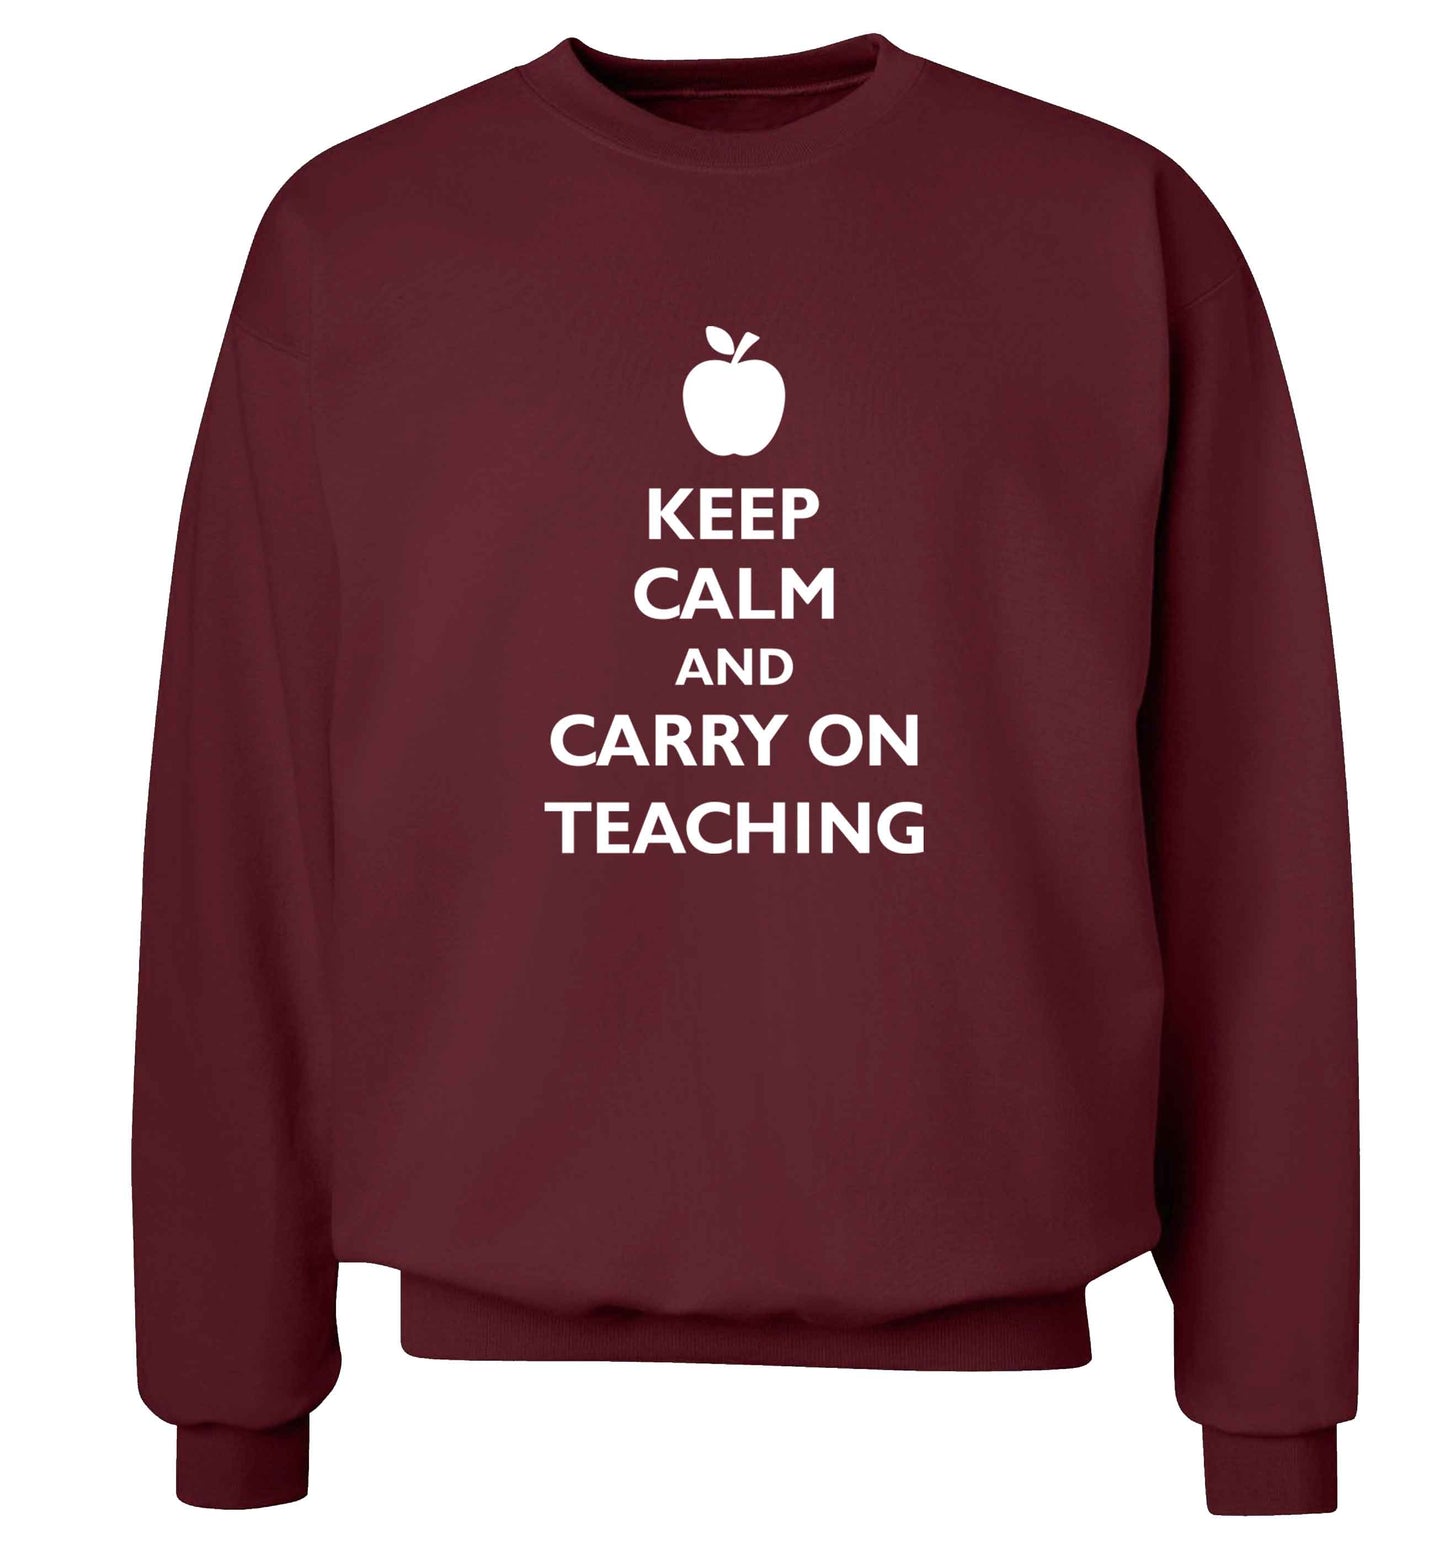 Keep calm and carry on teaching adult's unisex maroon sweater 2XL